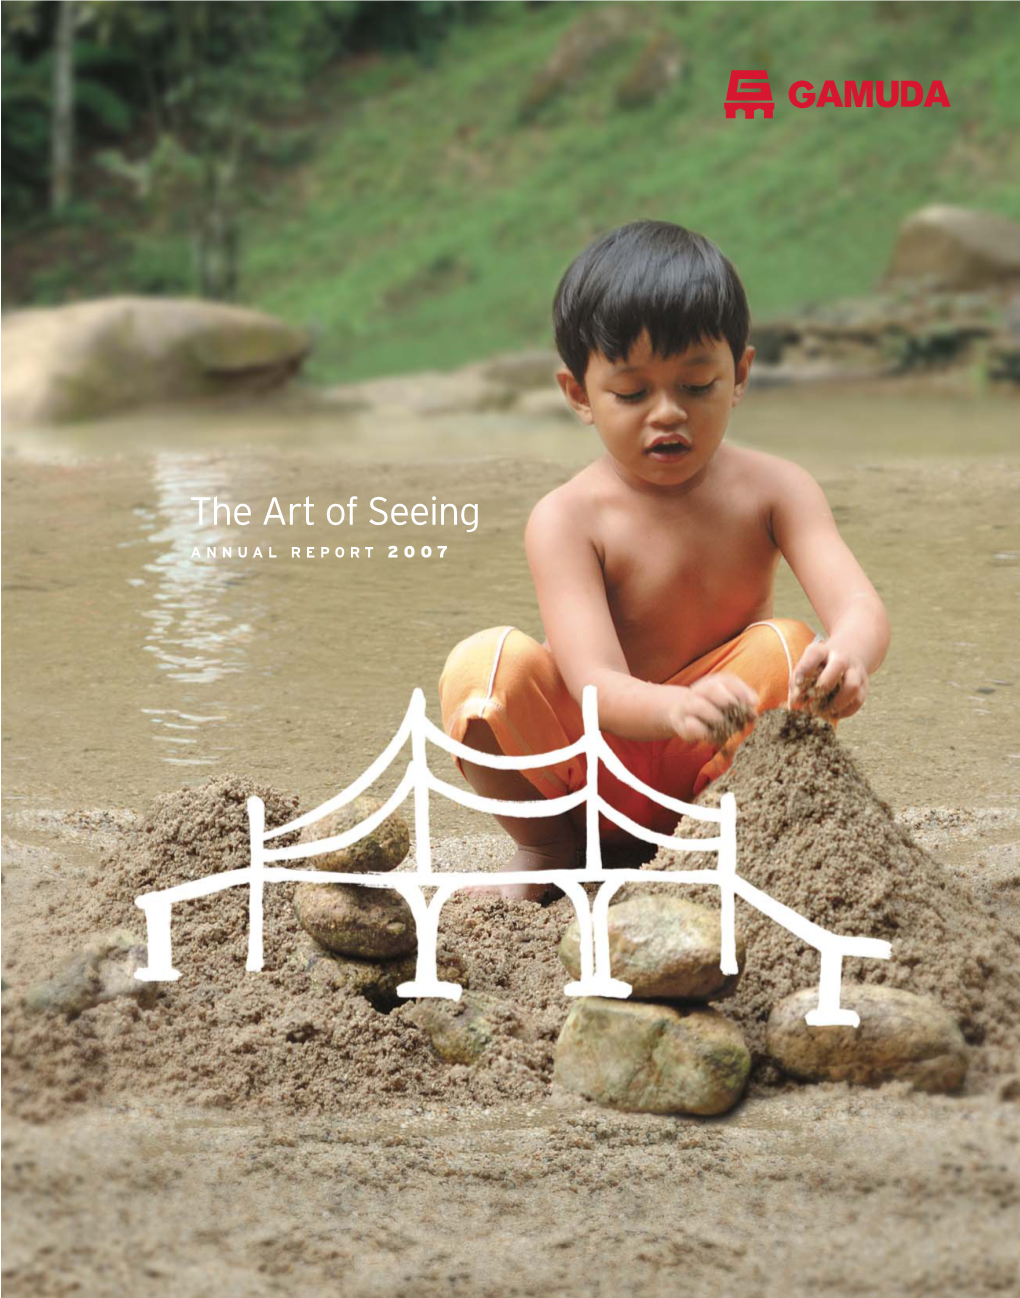 The Art of Seeing ANNUAL REPORT 2007 the ART of SEEING It’S All About Thinking out of the Box